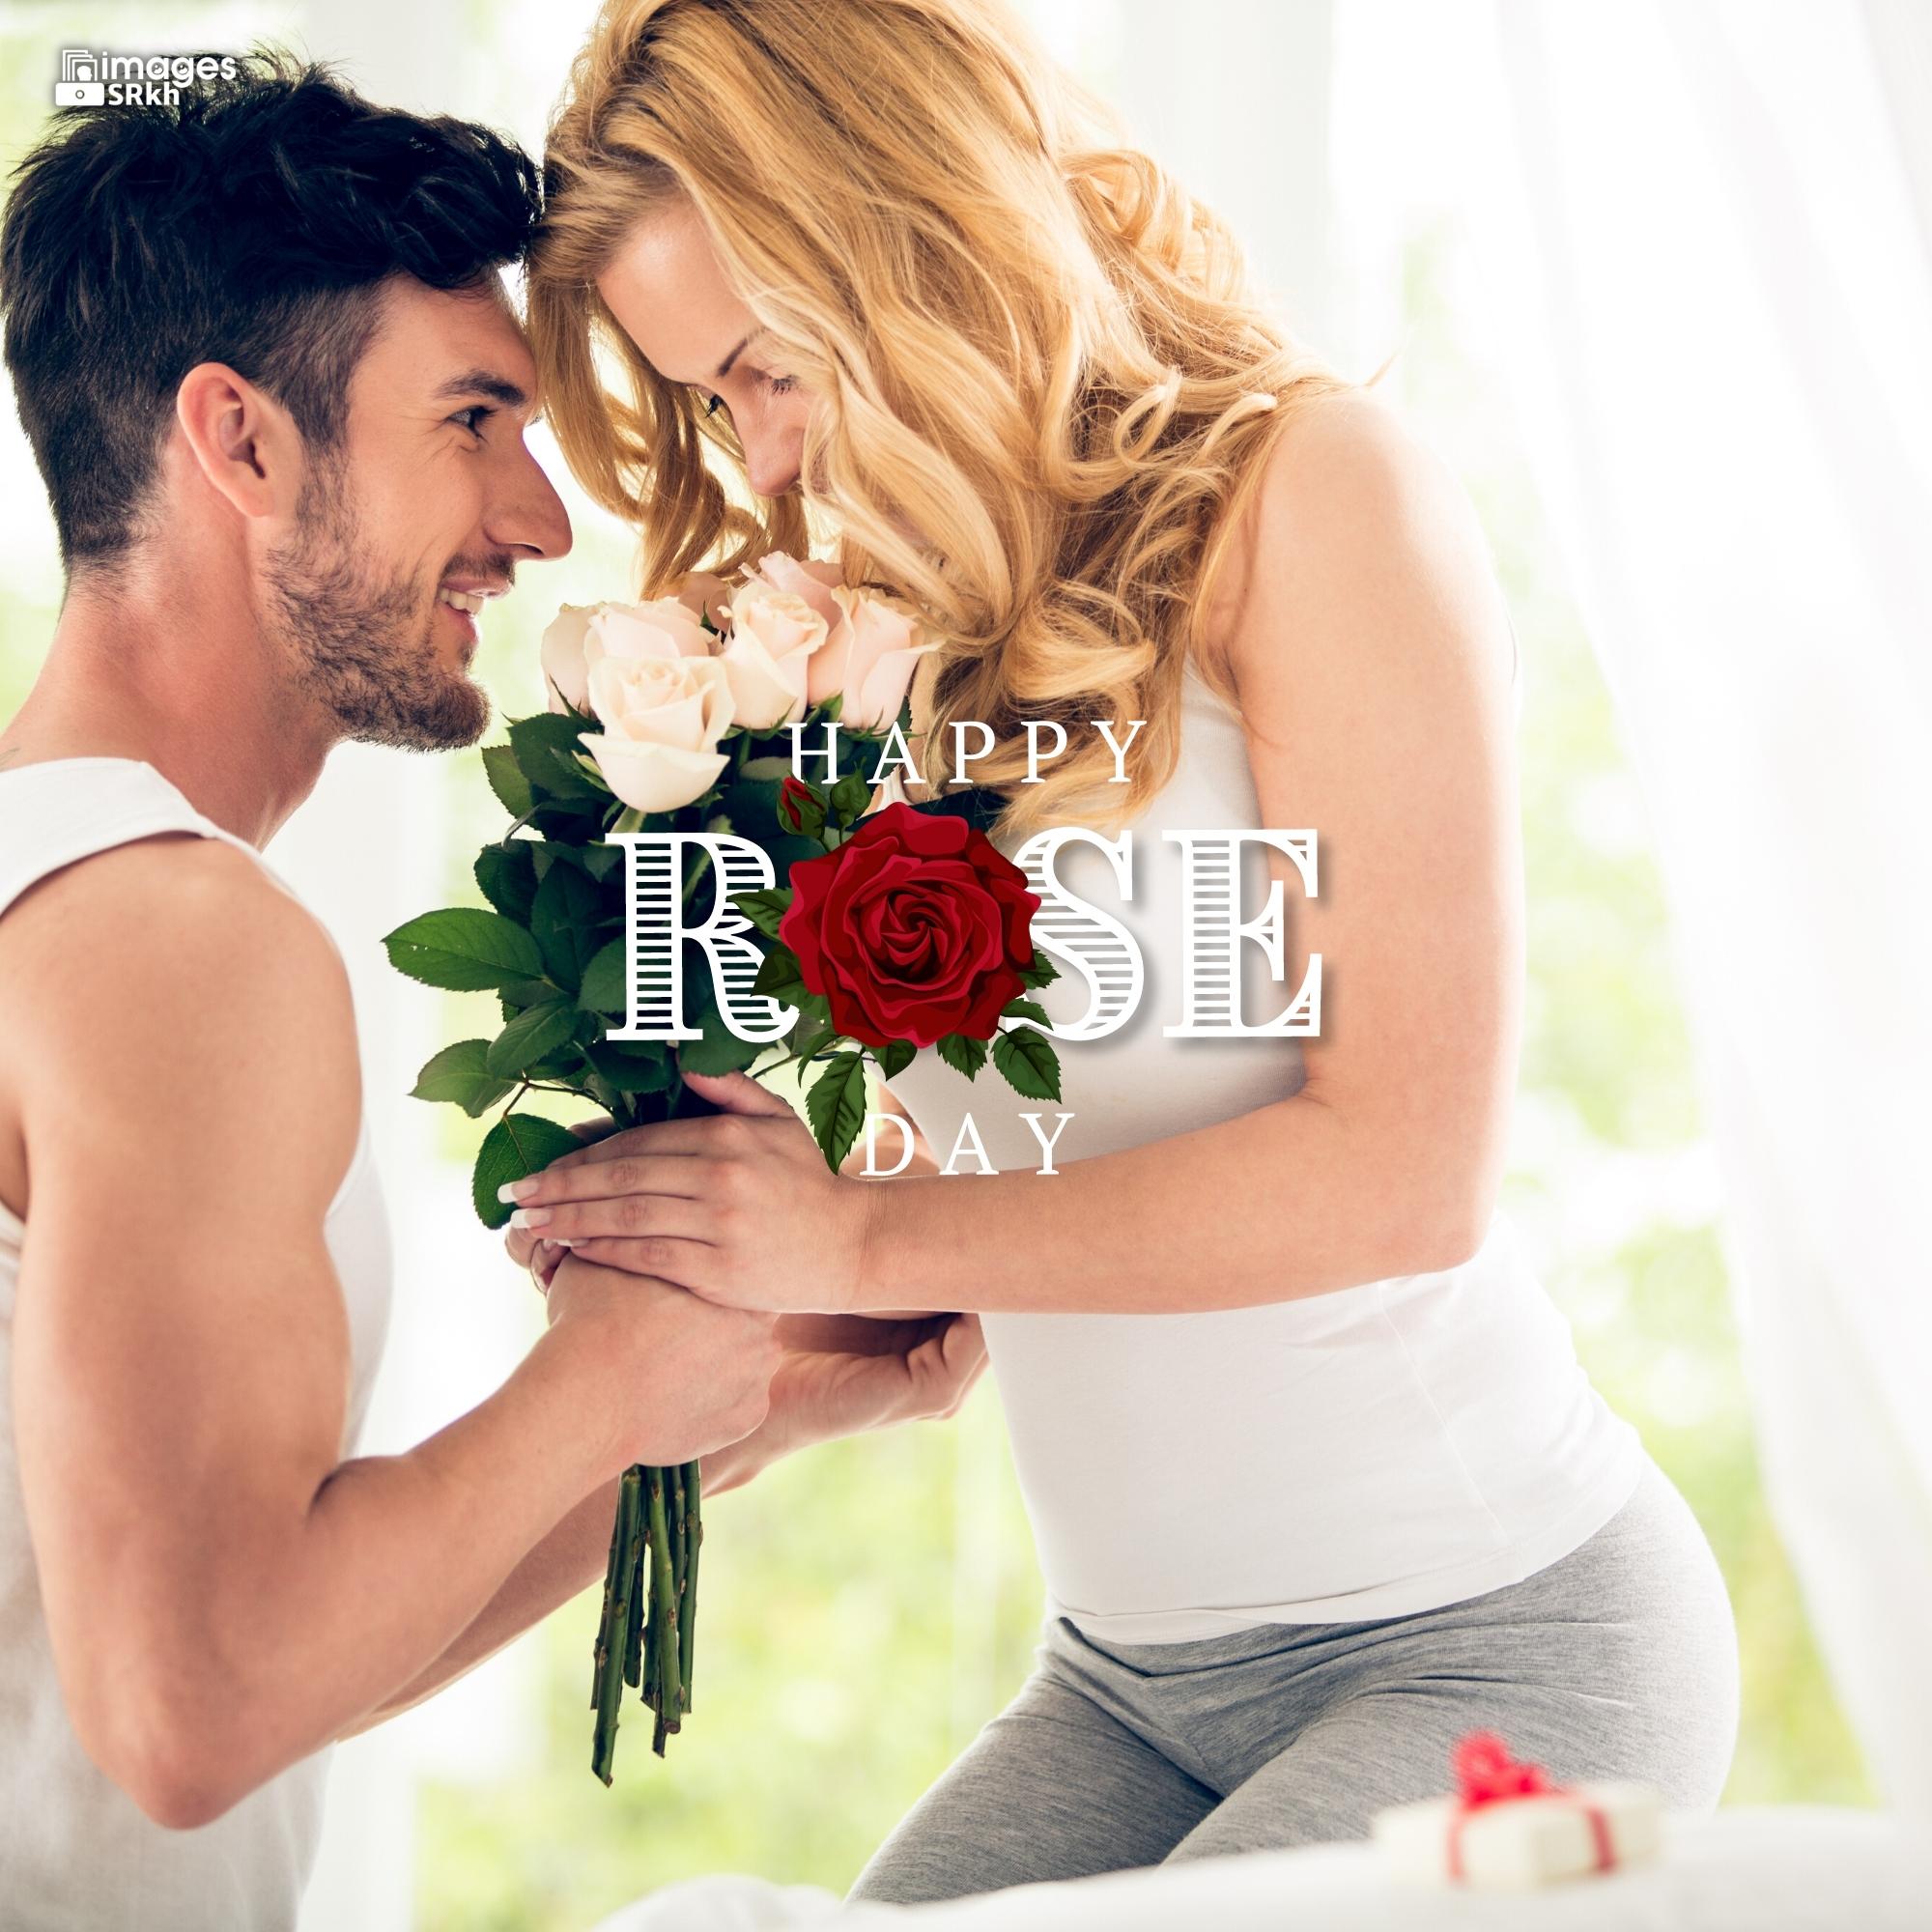 Romantic Rose Day Images Hd Download (34)